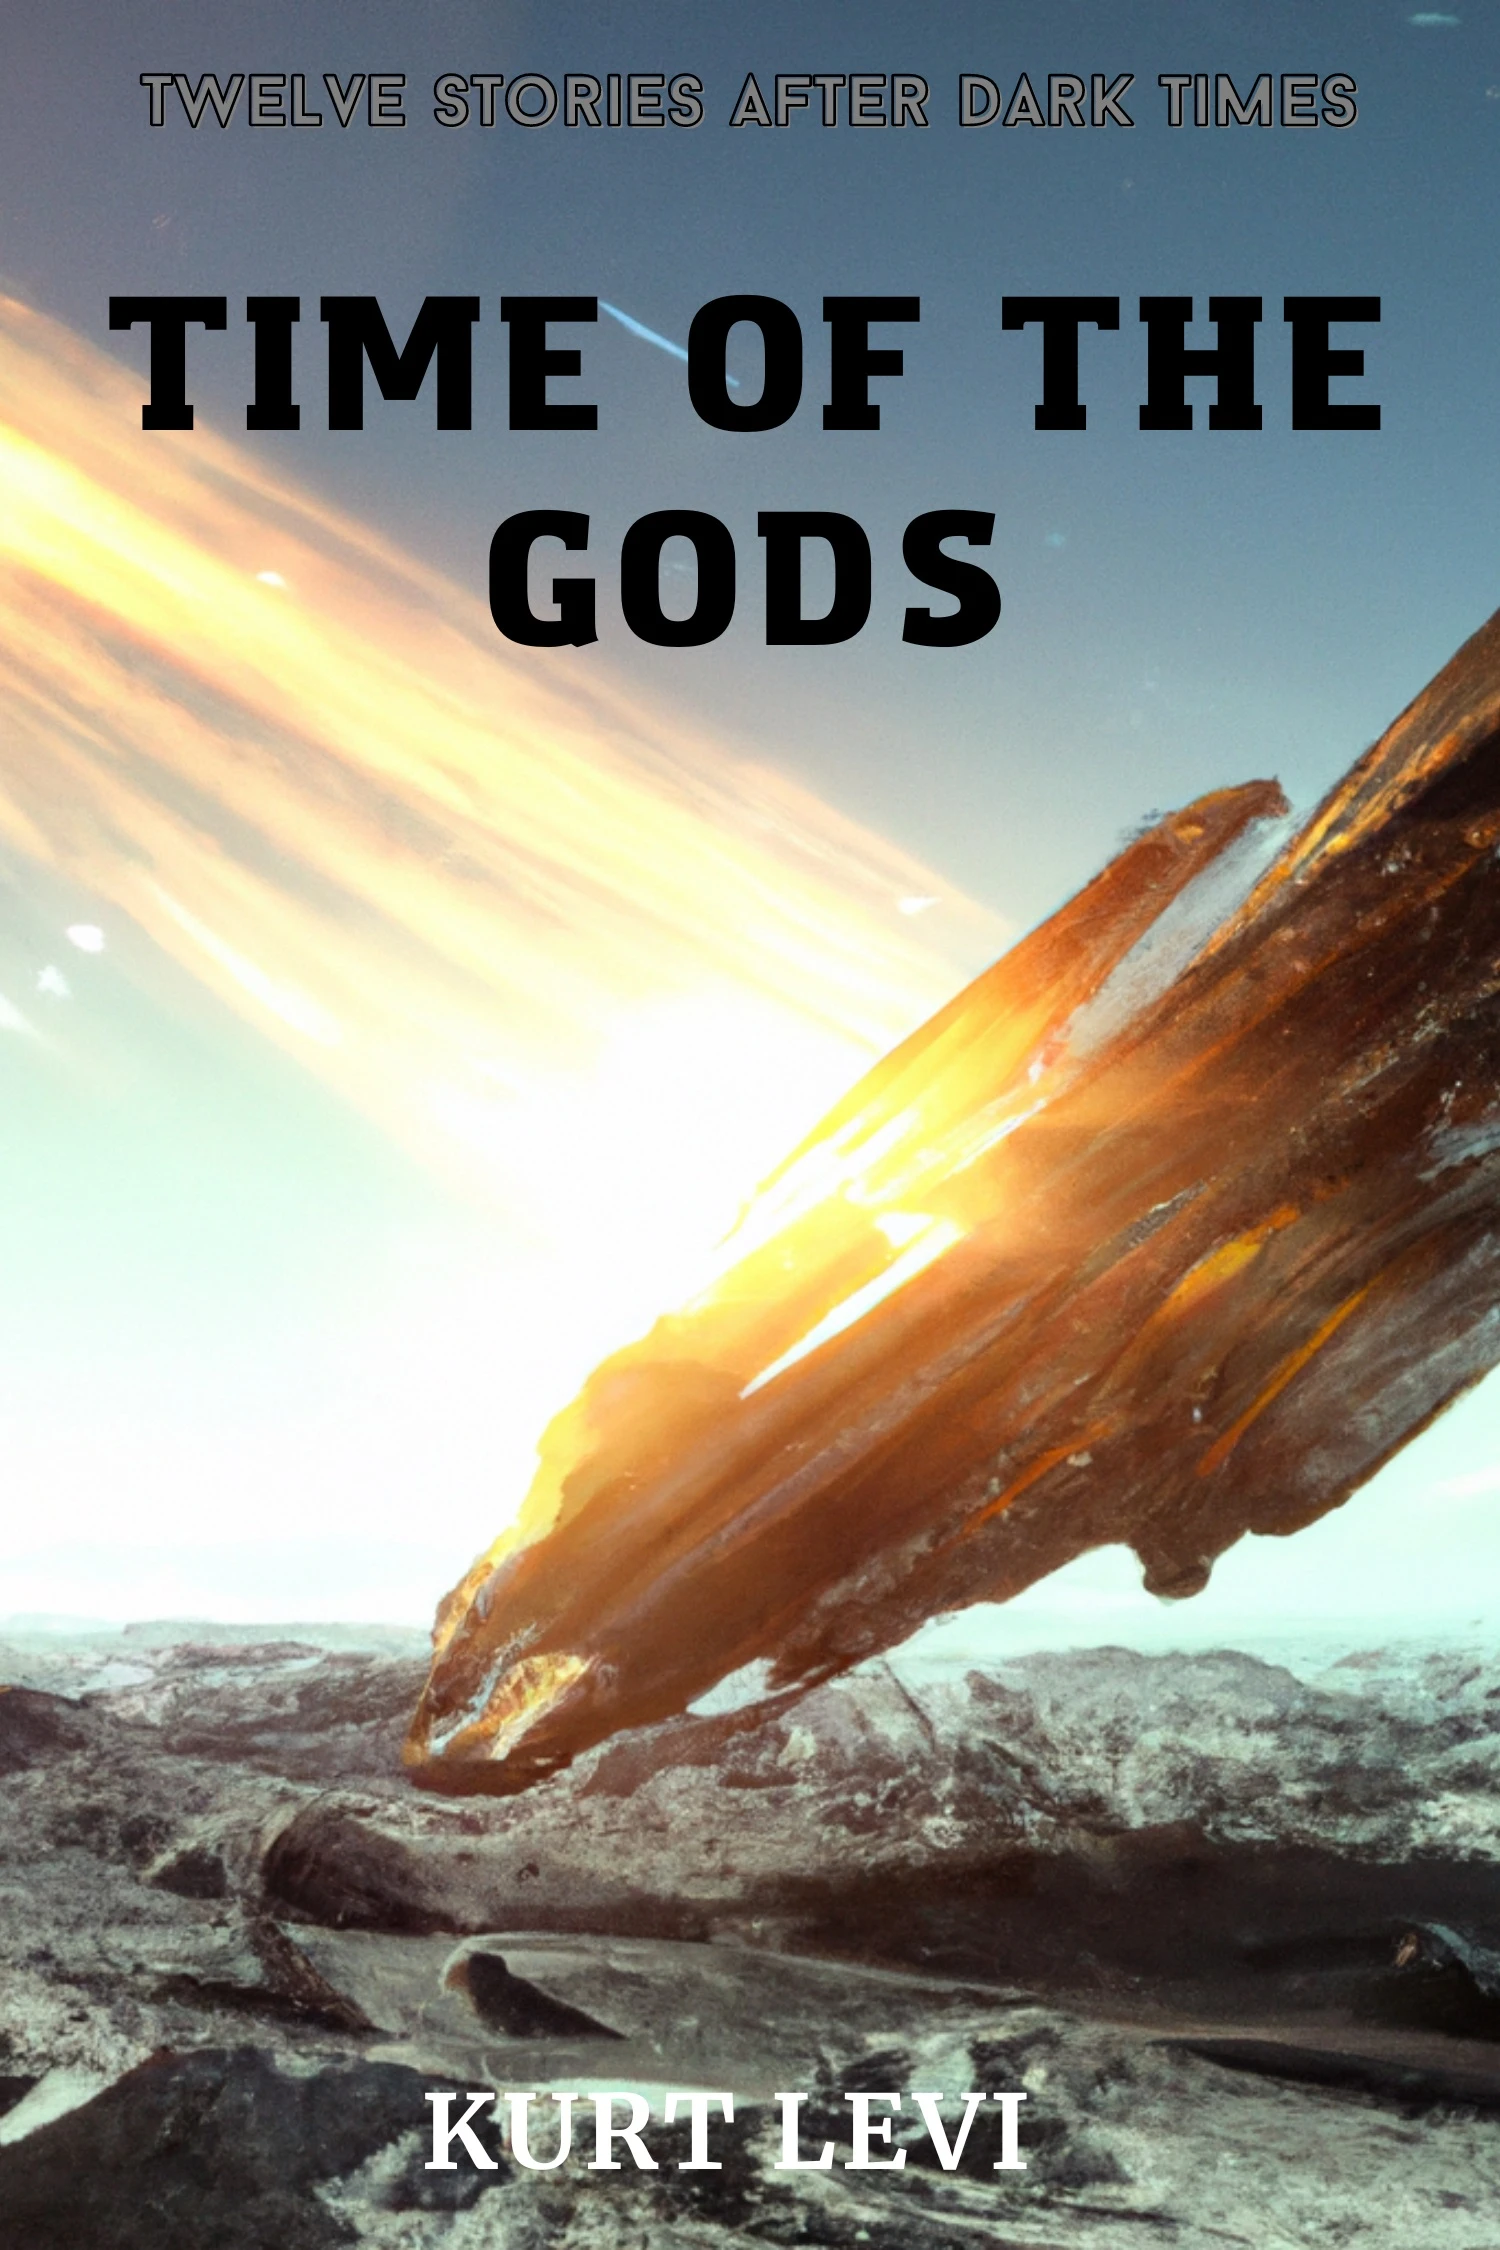 Time of the Gods: After dark times